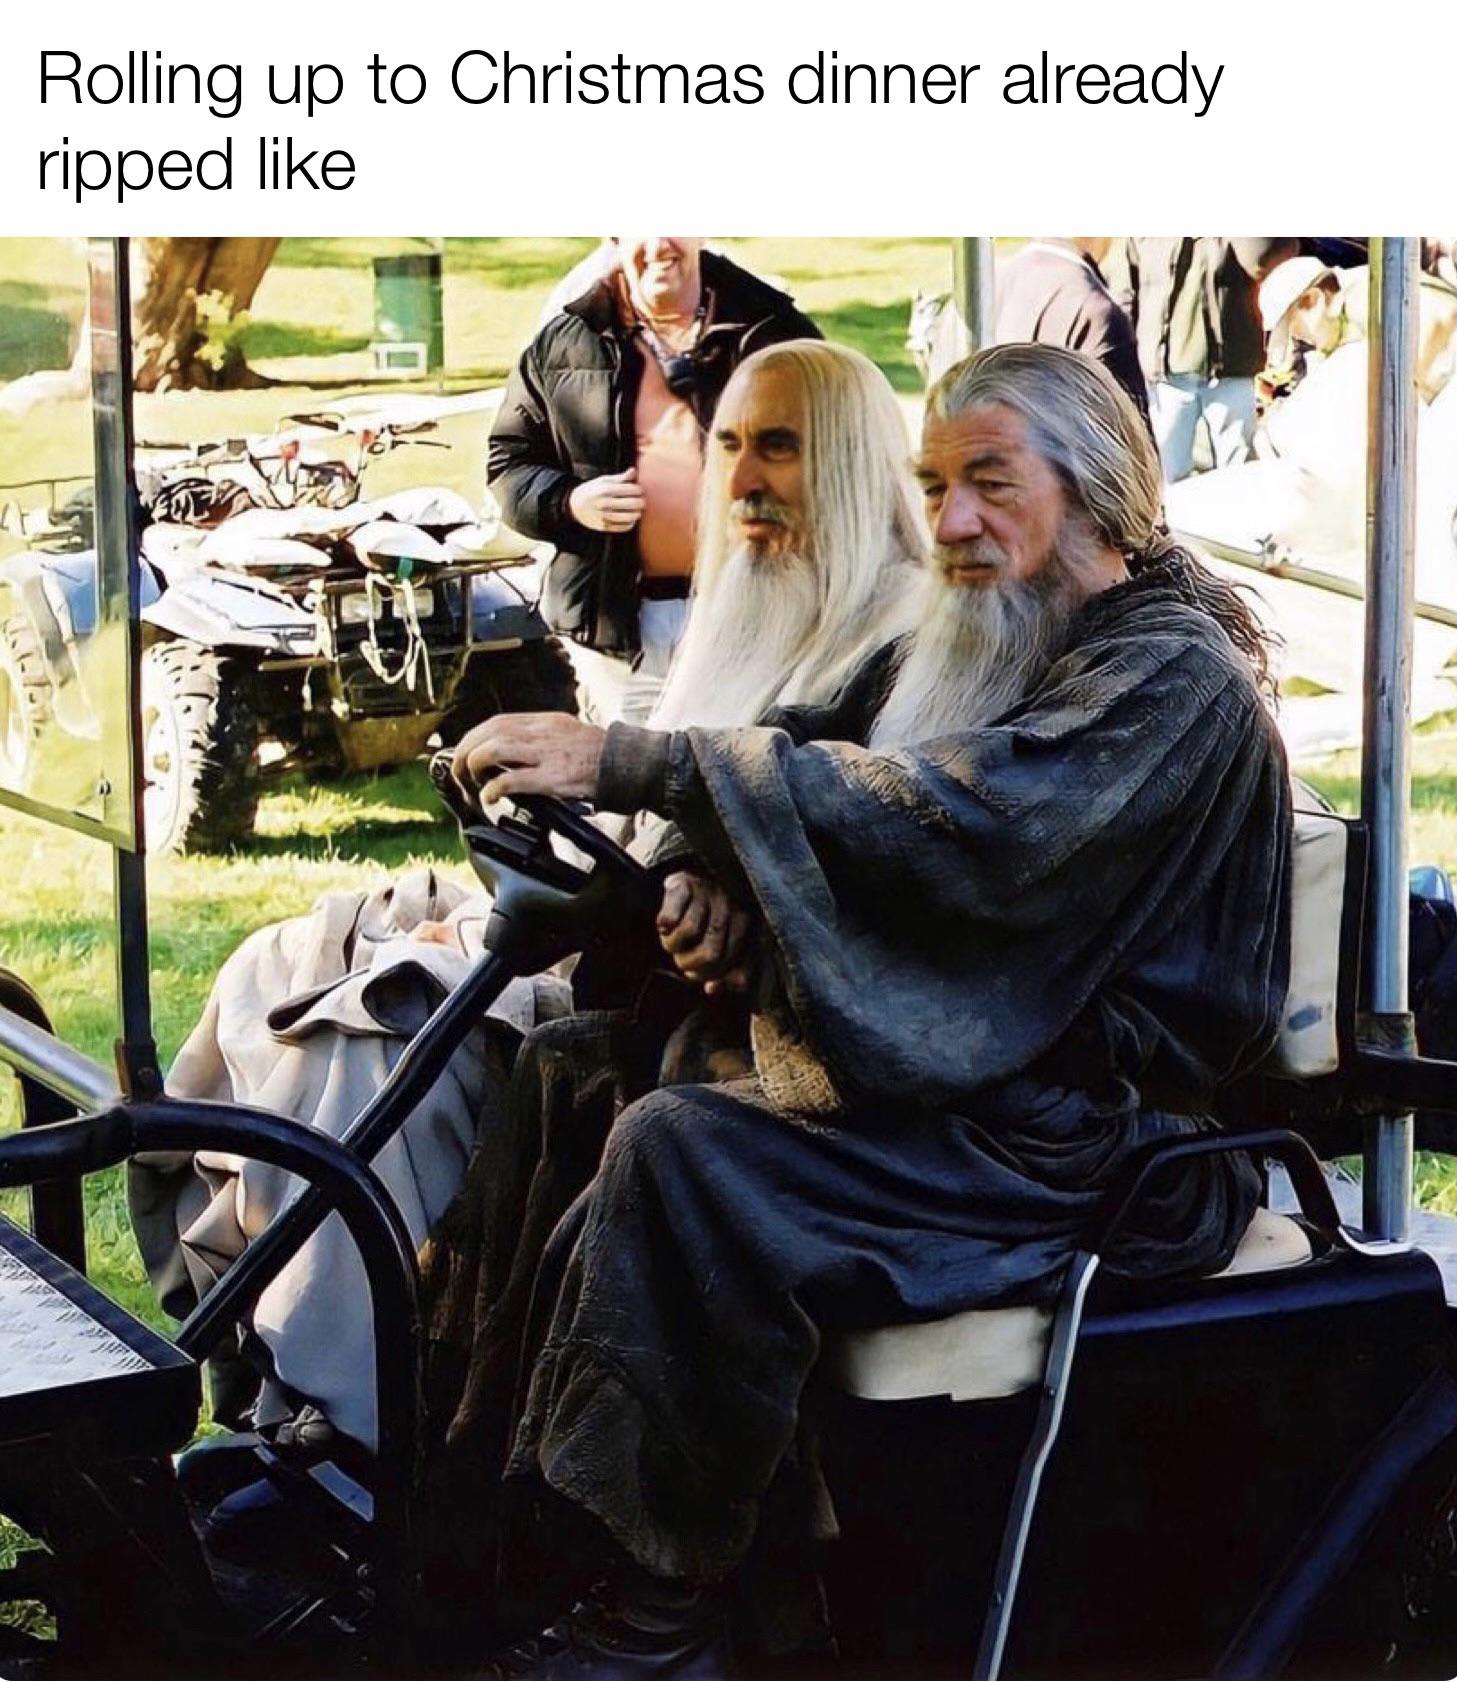 lord of the rings behind the scenes - Rolling up to Christmas dinner already ripped hello